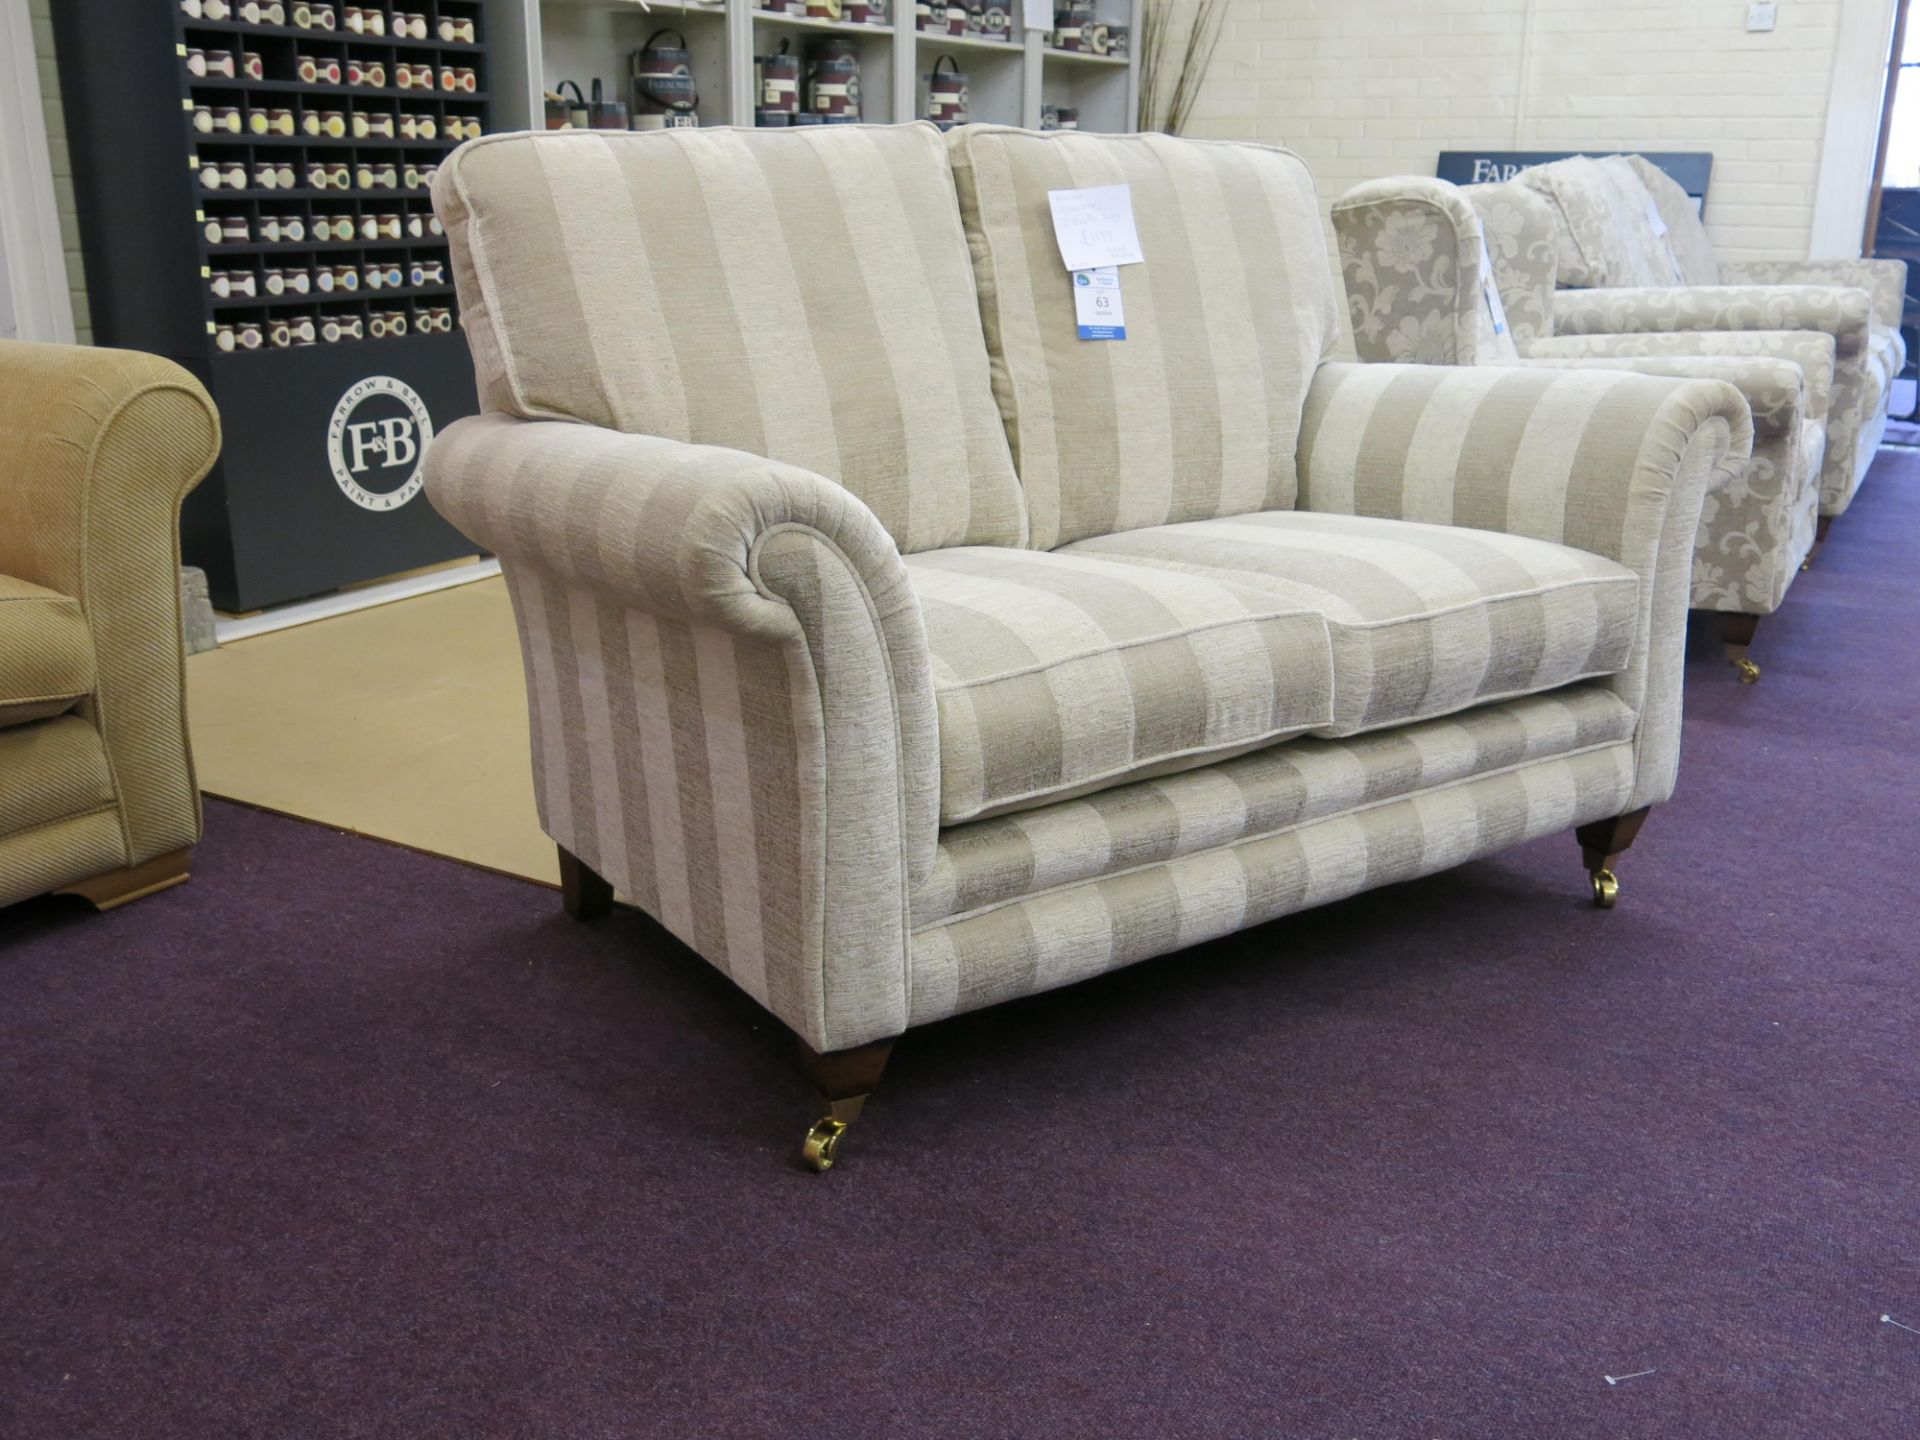 Alstons Ixworth two seat sofa with oyster stripe cover with polished brass castors on front feet. - Image 2 of 4